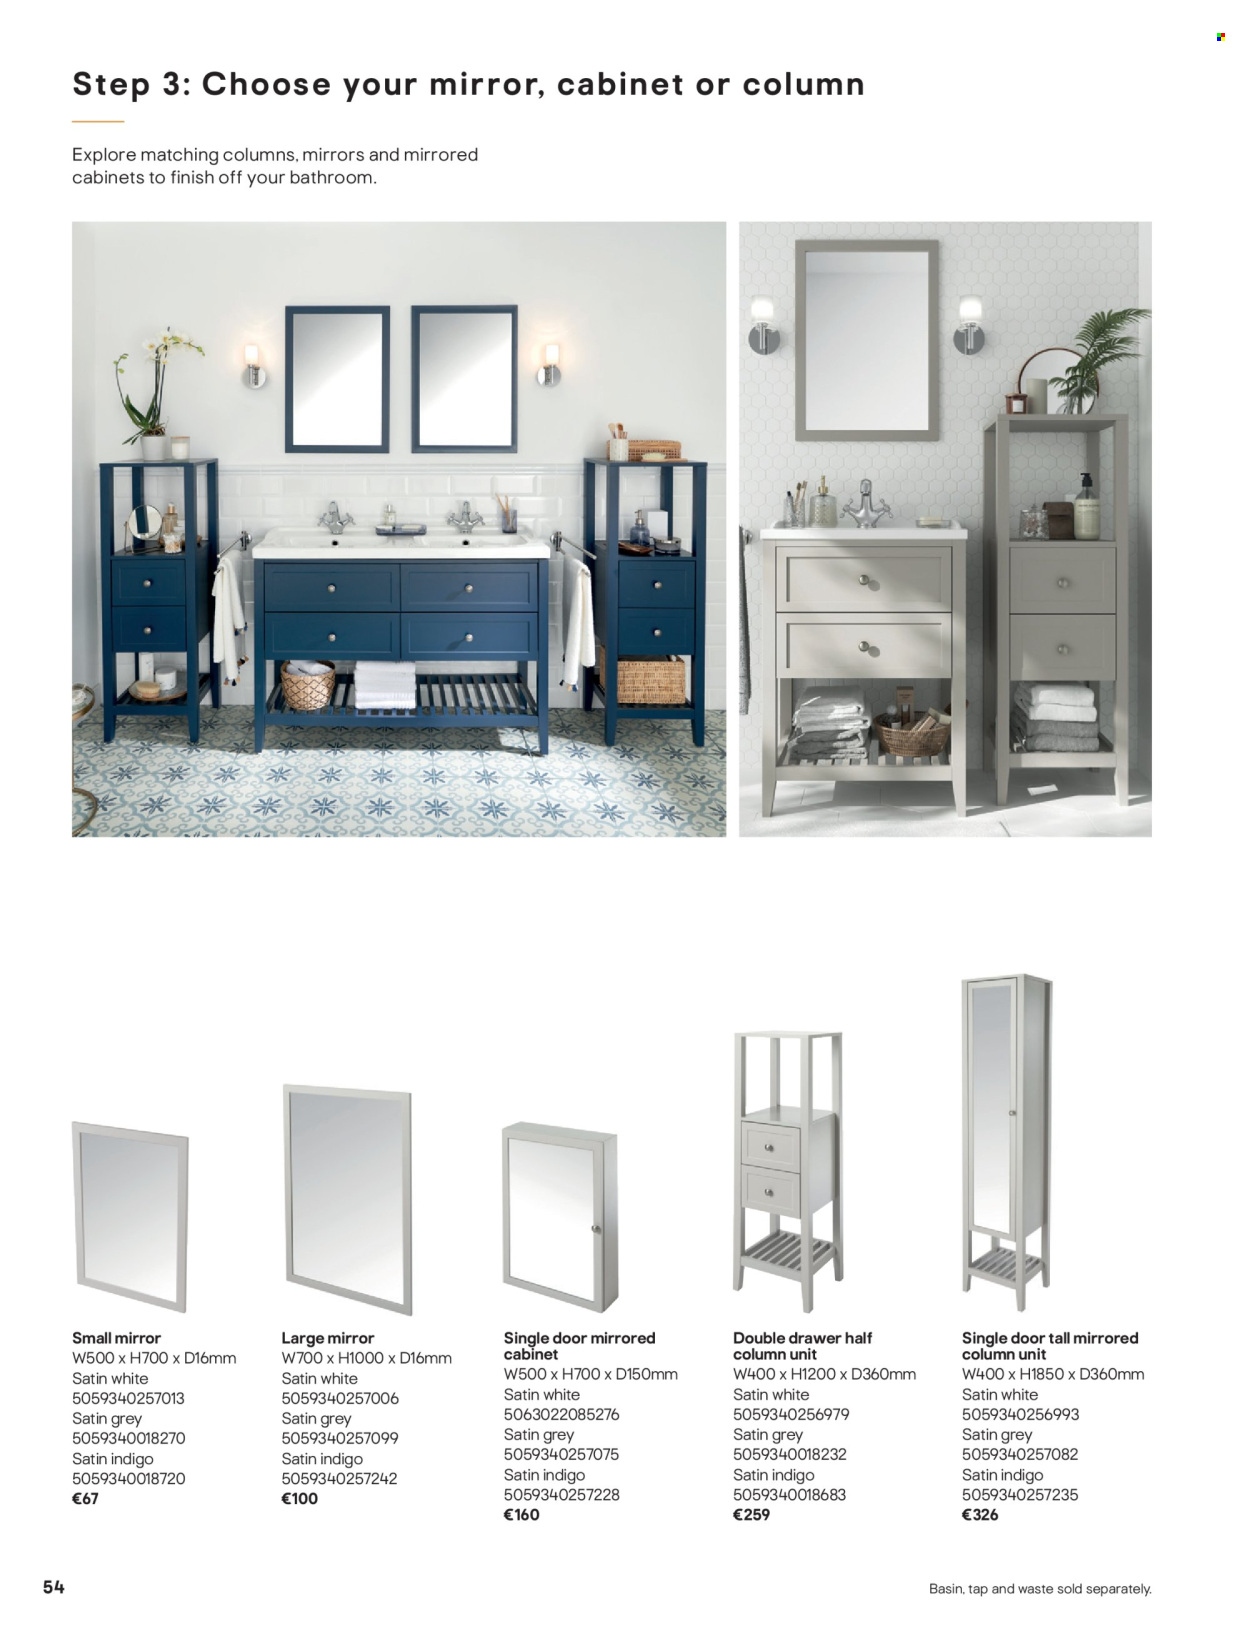 thumbnail - B&Q offer  - Sales products - cabinet, mirror. Page 54.